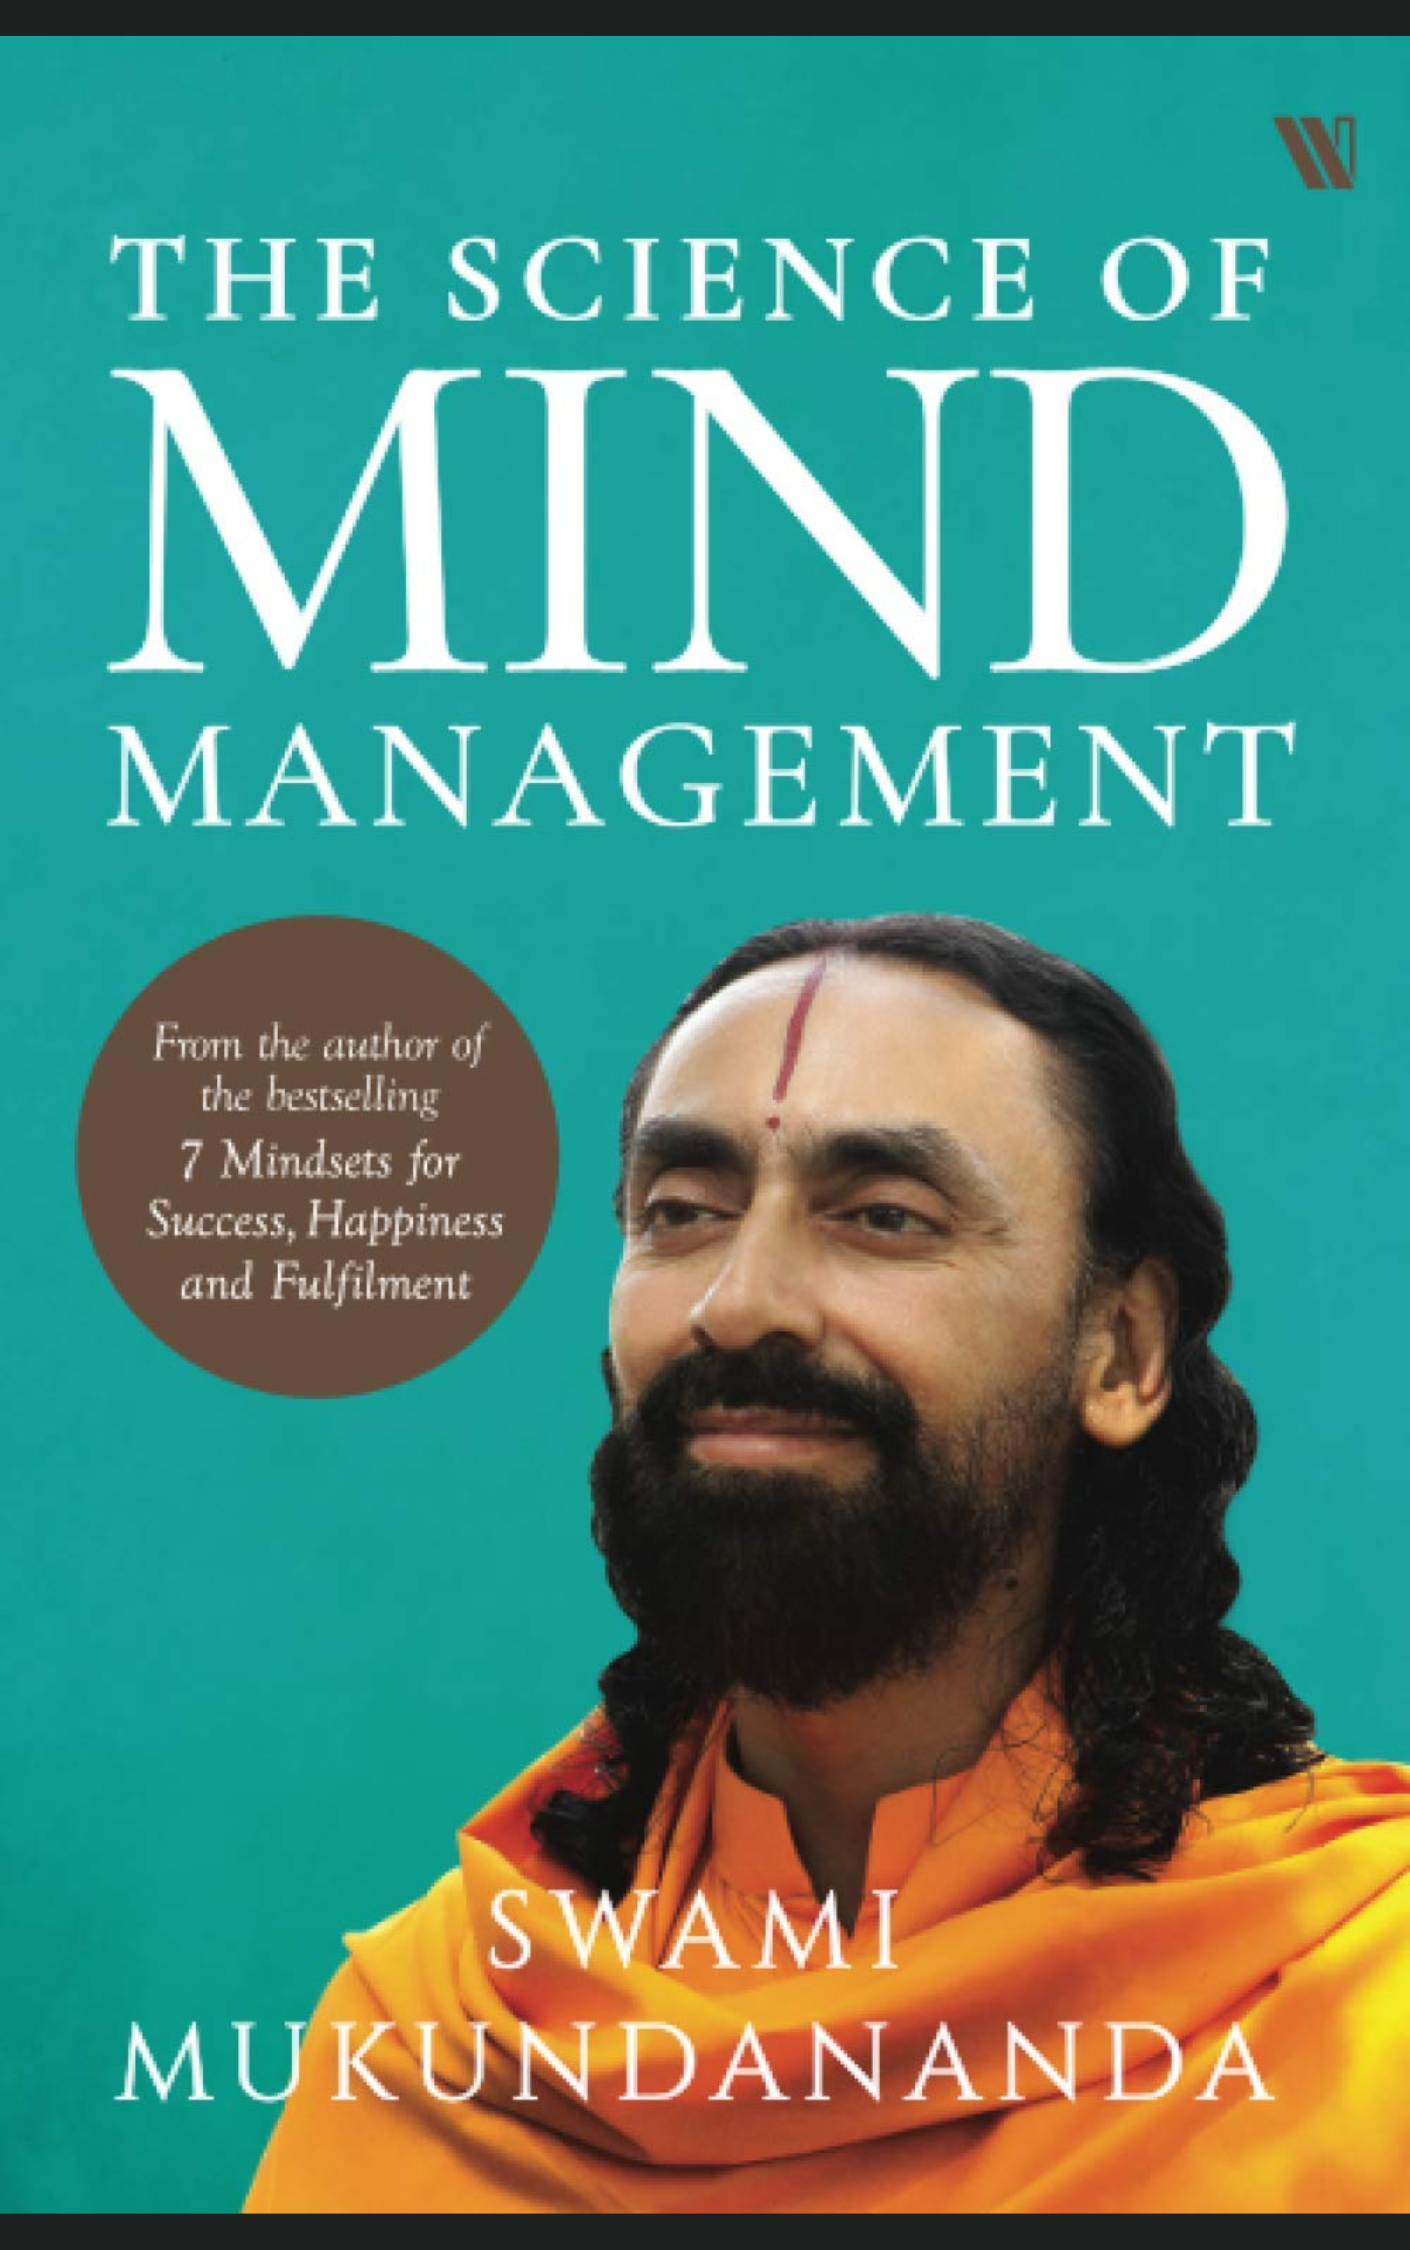 THE SCIENCE OF MIND MANAGEMENT by SWAMI MUKUNDANANDA